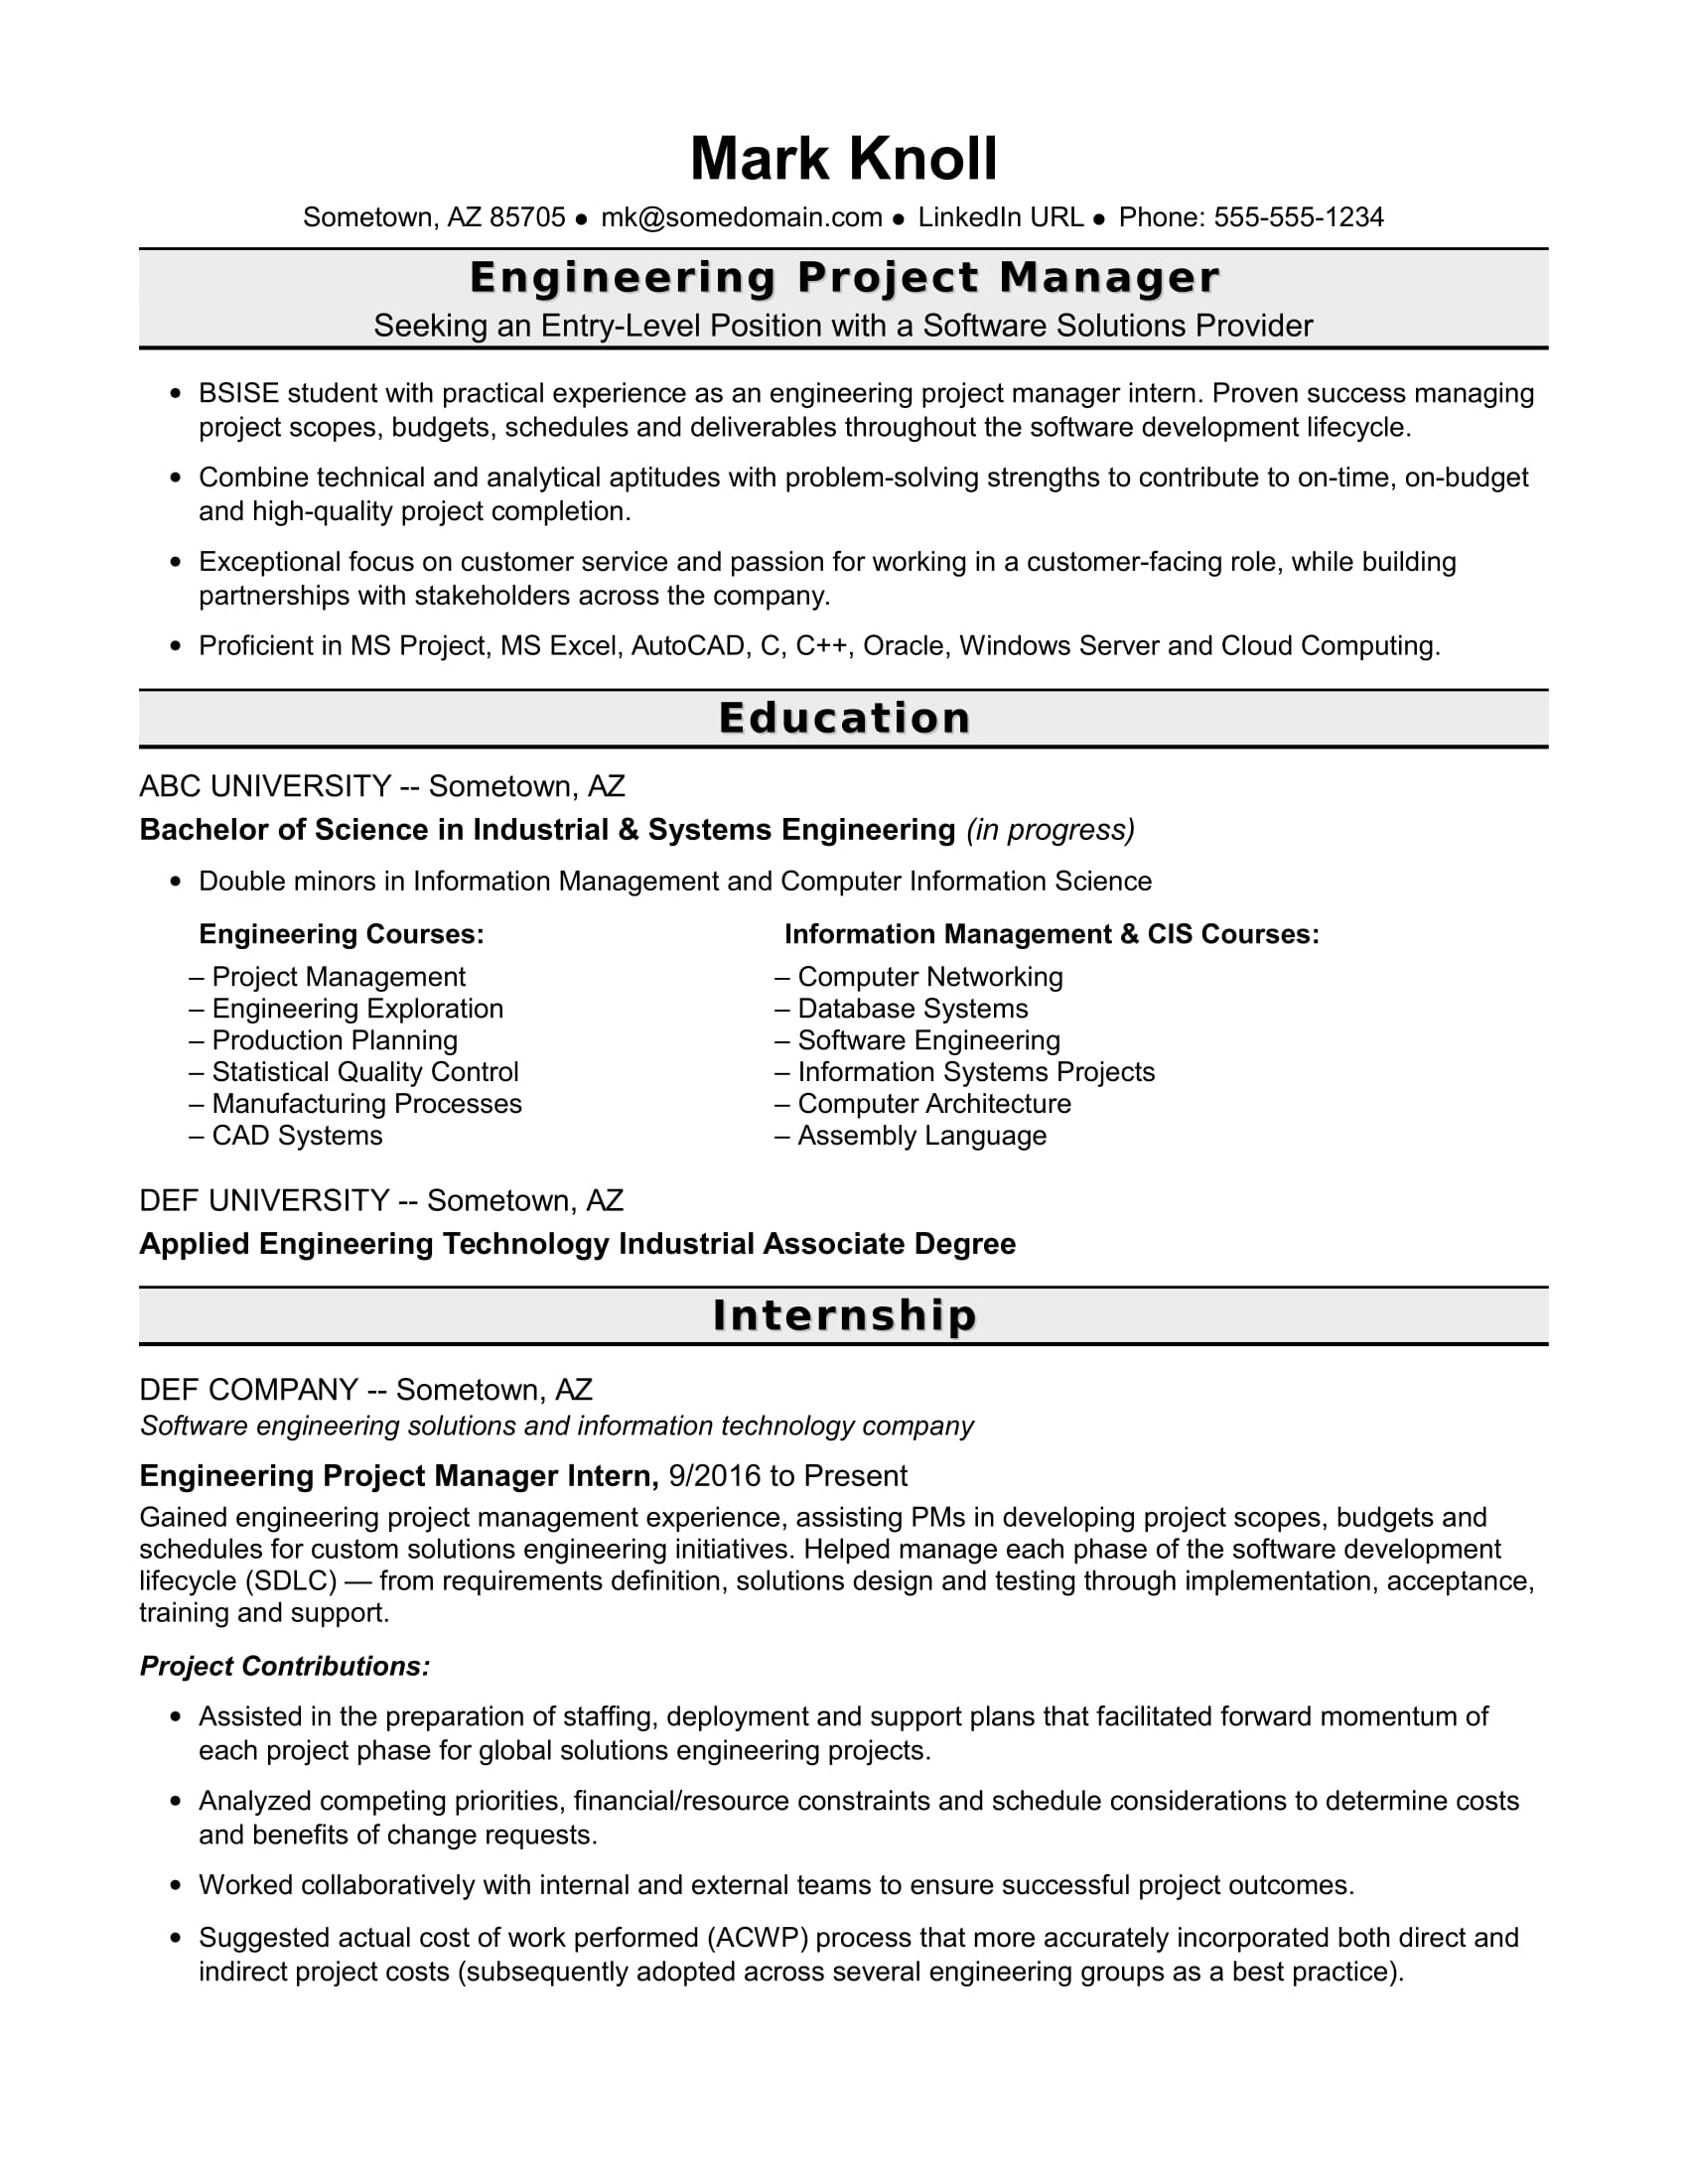 Sample Resume For An Entry Level Engineering Project Manager for sizing 1700 X 2200